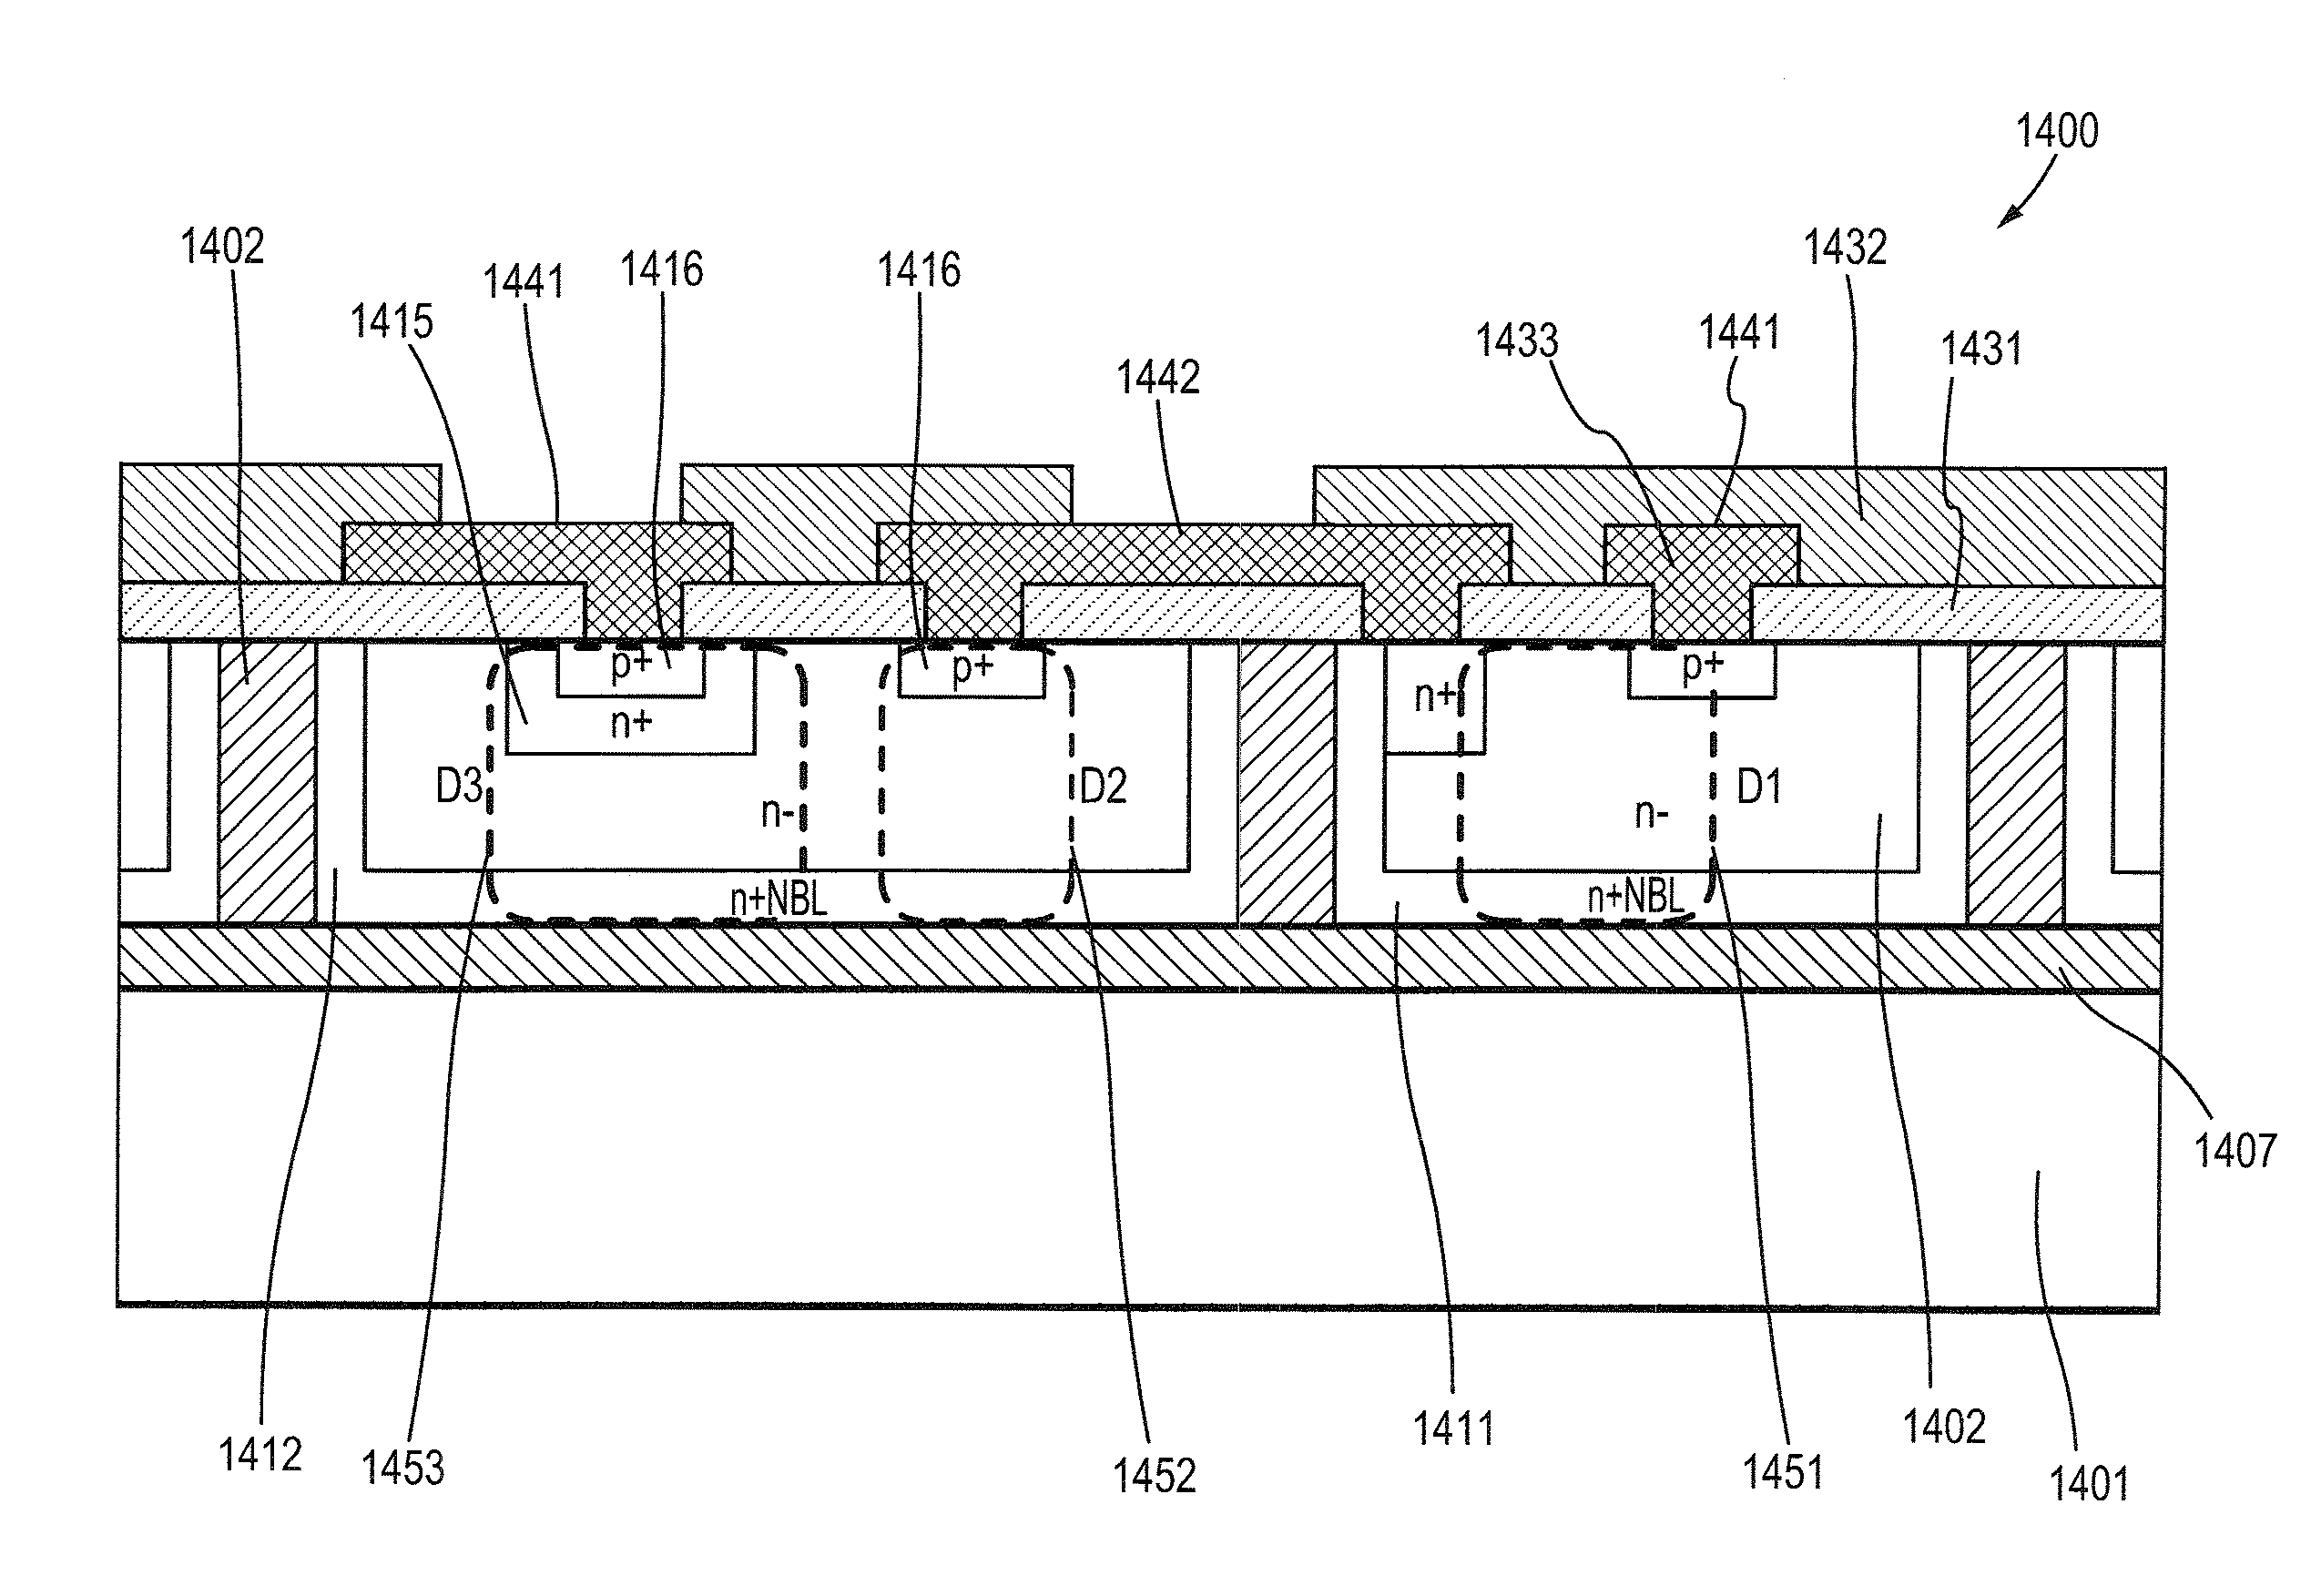 Semiconductor device structure and methods of making